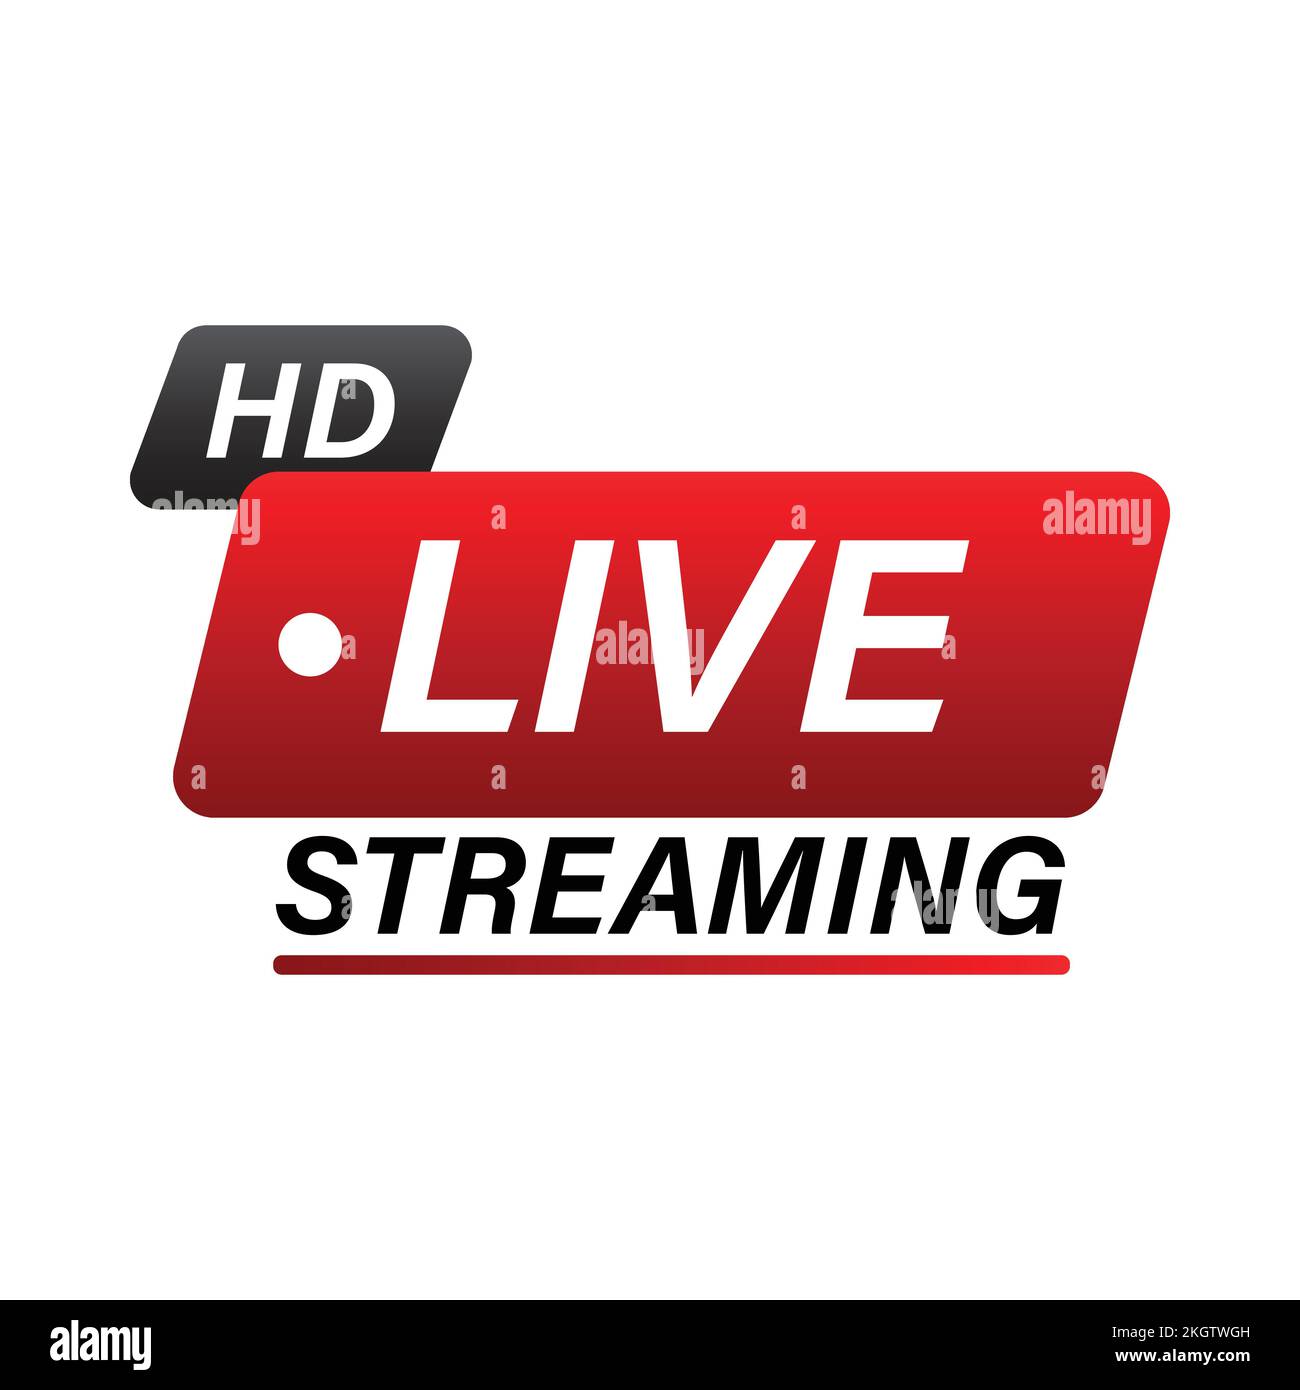 Live Stream Buttons Online Live Streaming Player Icons Social Media Concept  For Tv Shows Stock Illustration - Download Image Now - iStock